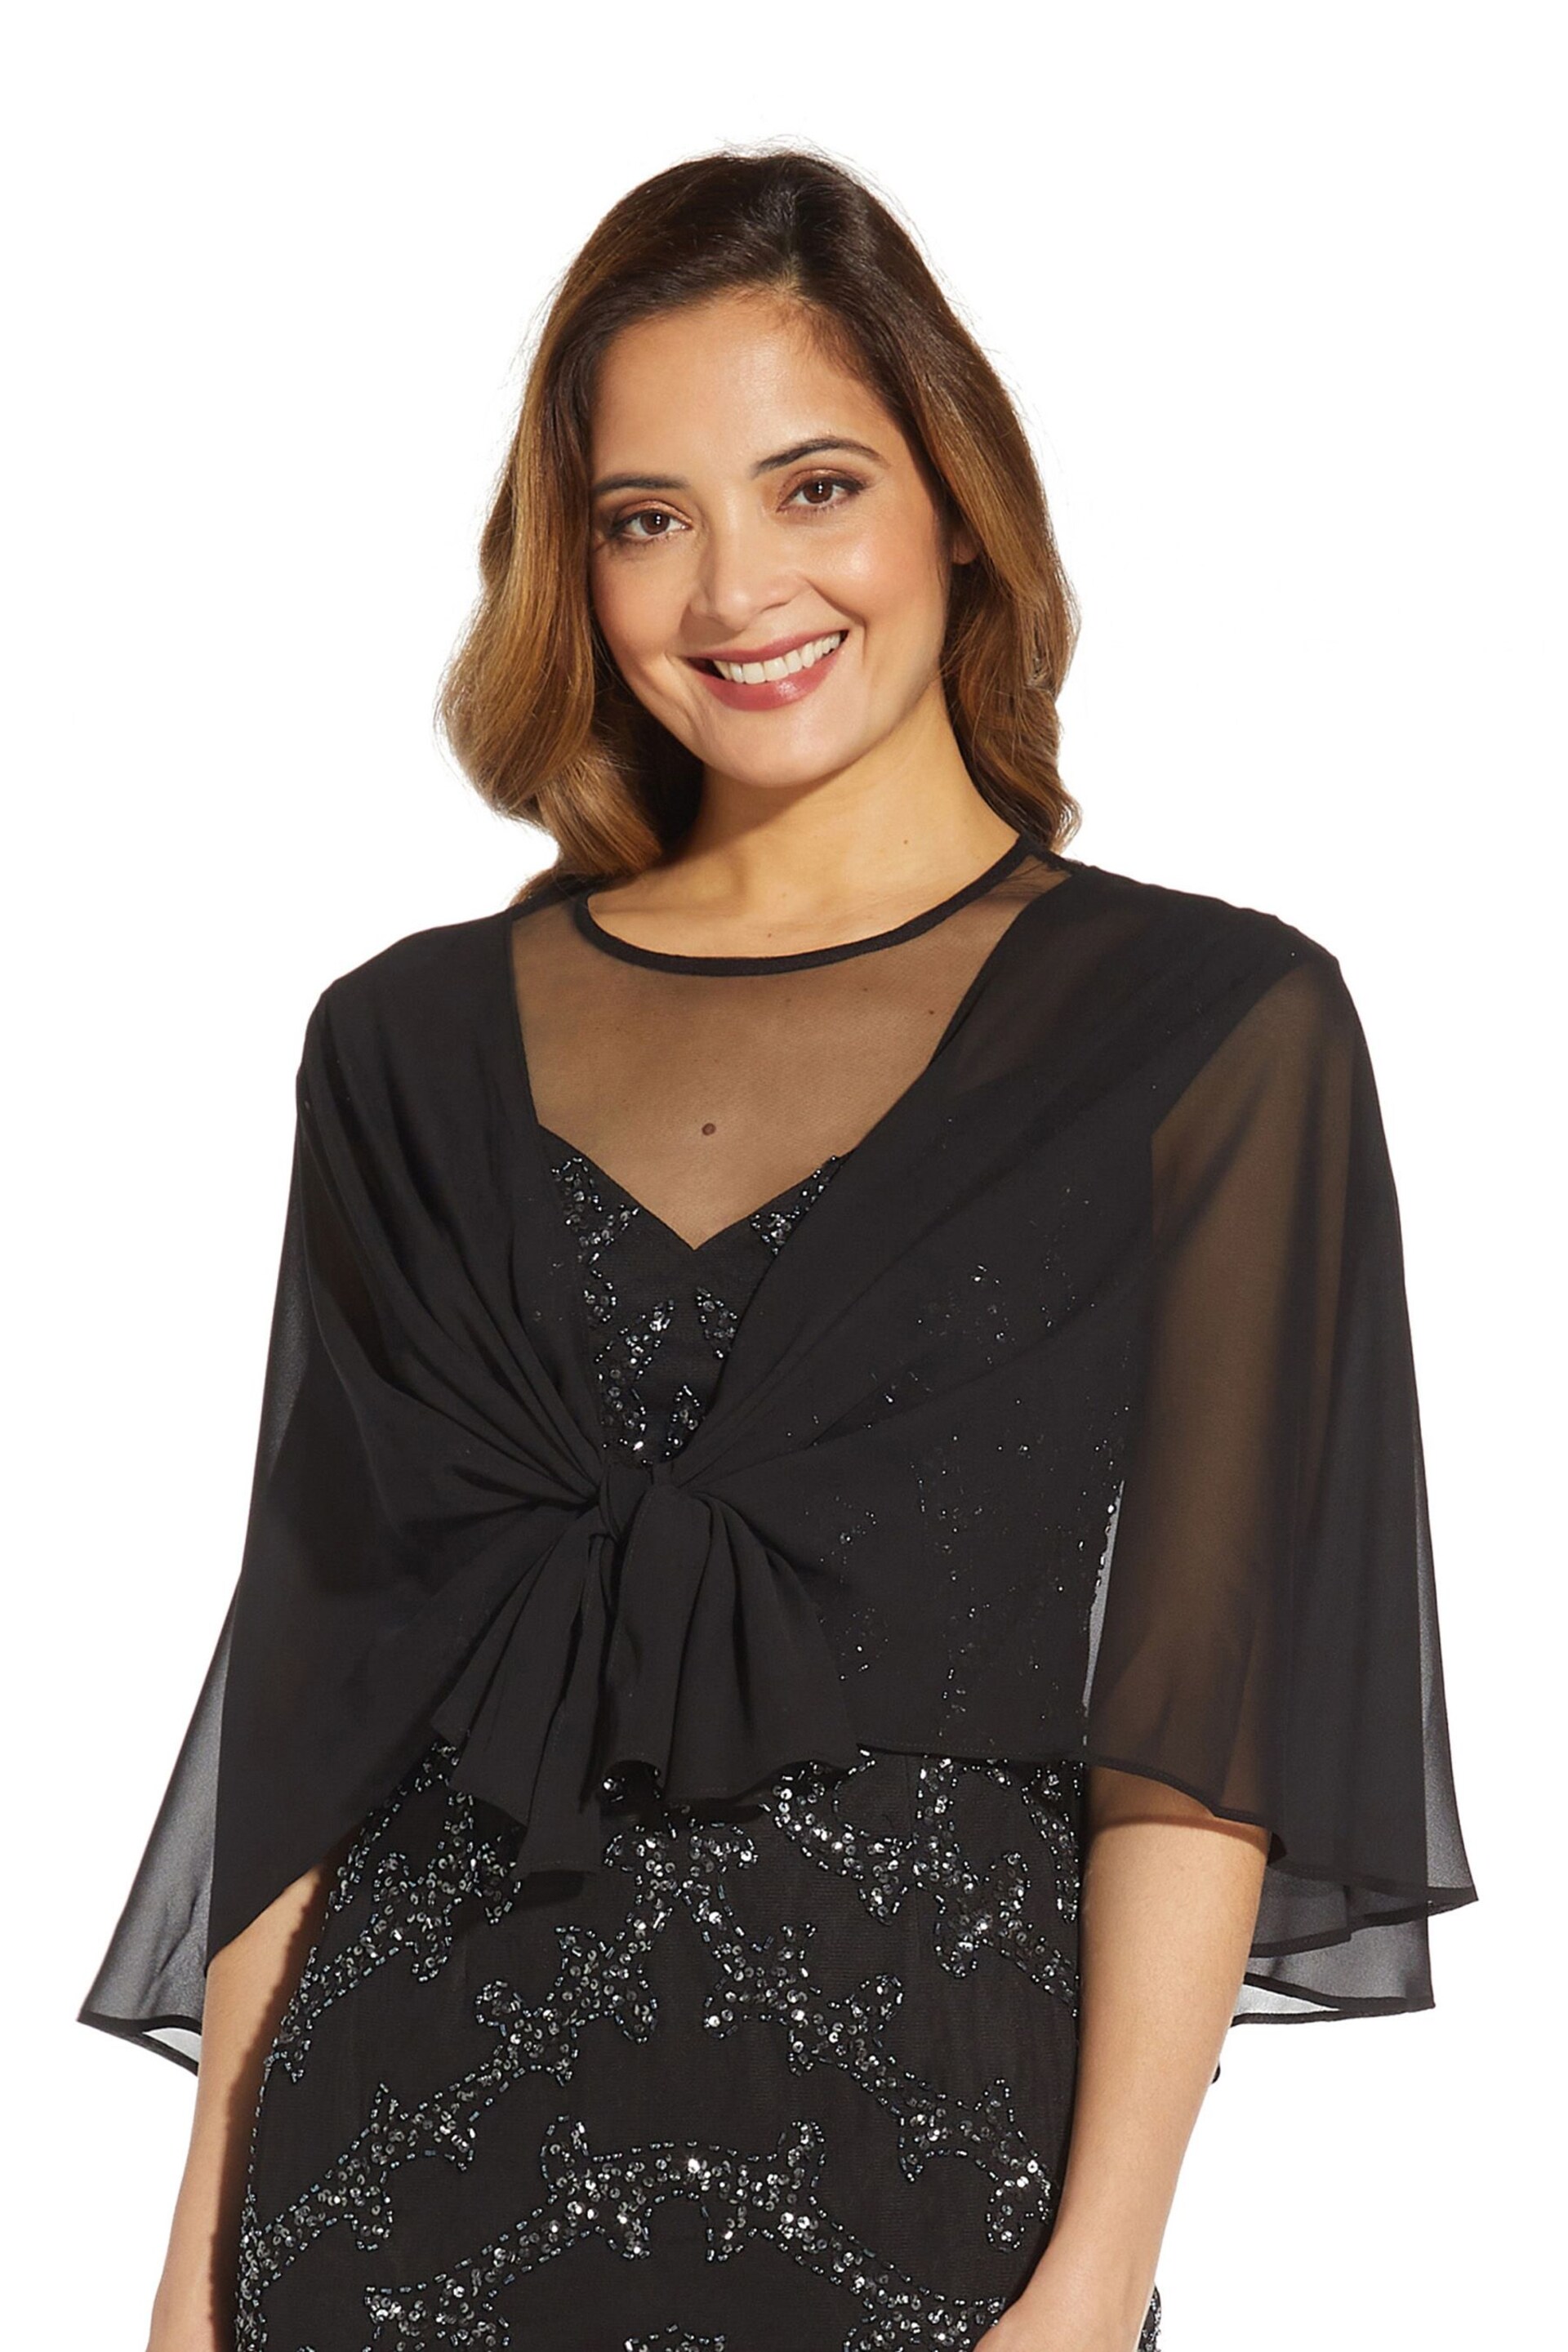 Adrianna Papell Black Chiffon Cover-Up - Image 4 of 4